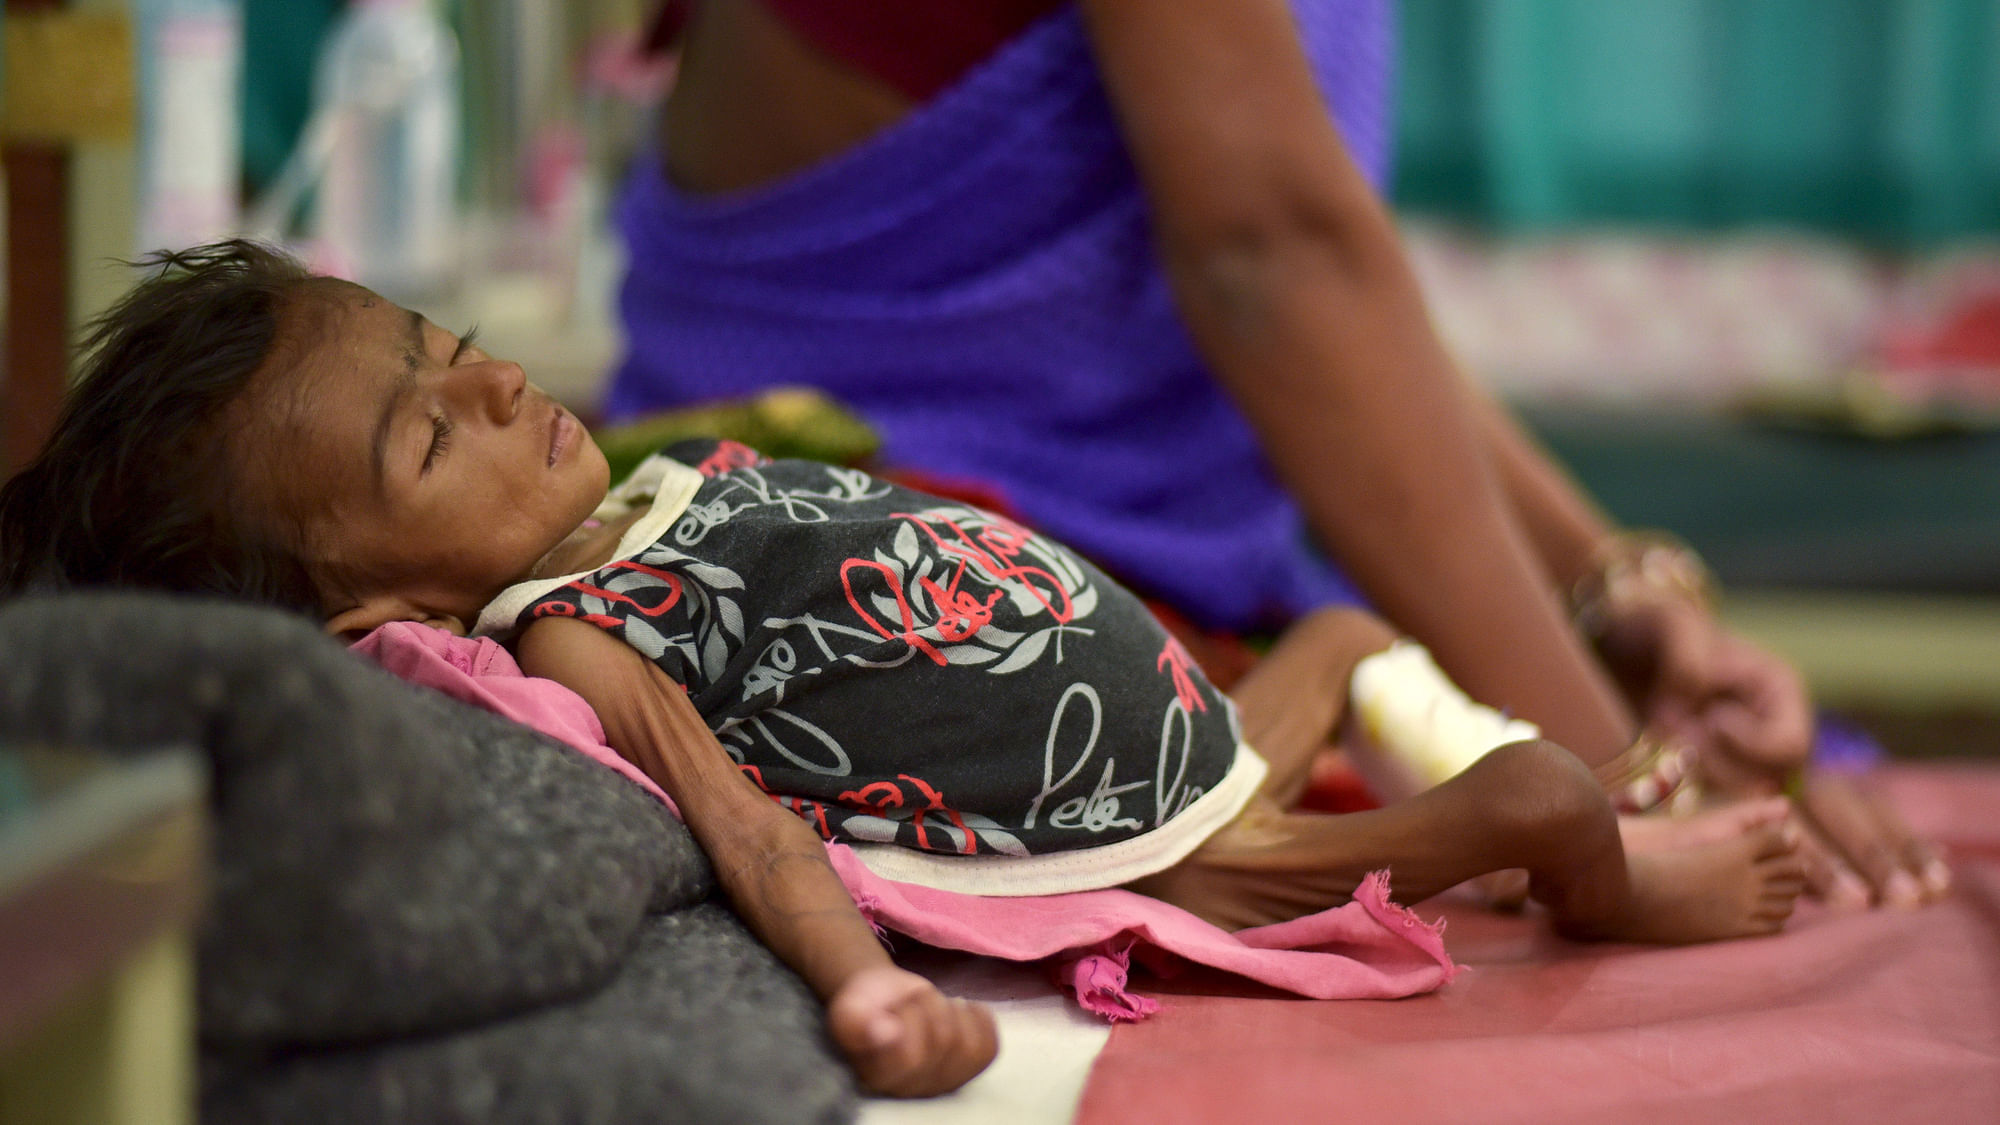 The Global Nutrition Report classifies India as experiencing two forms of malnutrition – anaemia and stunting.